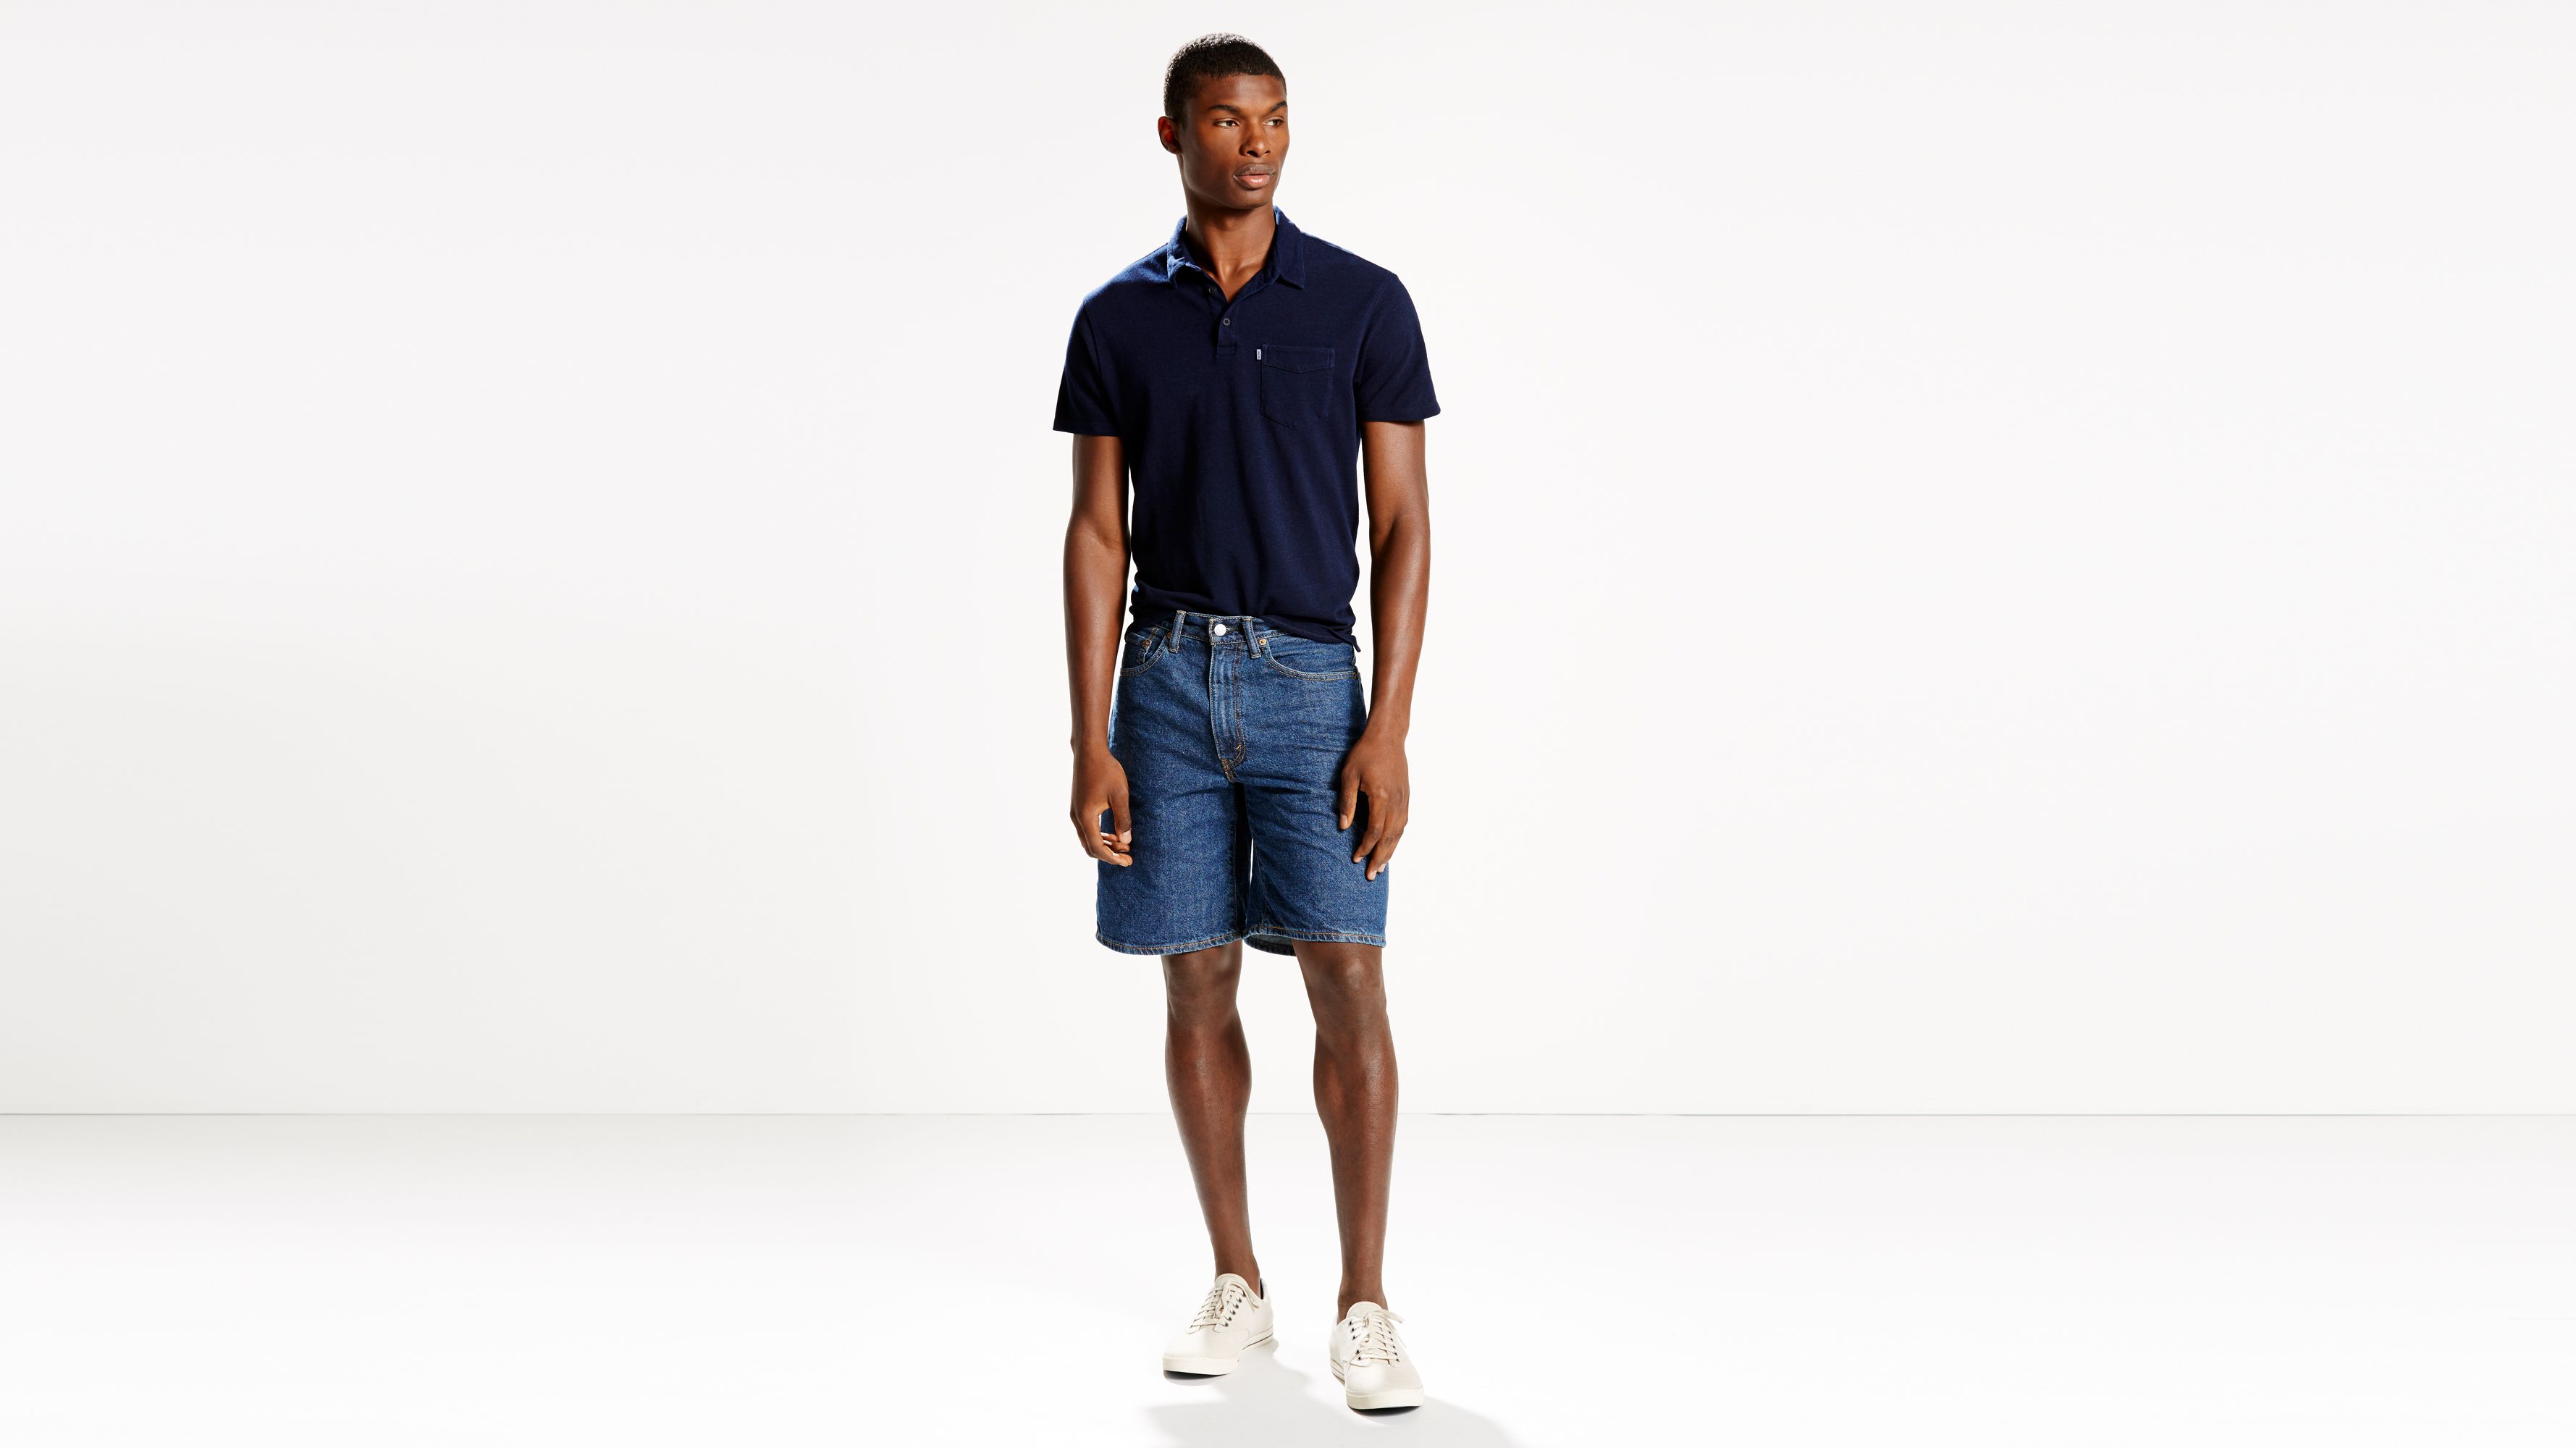 550™ Relaxed Fit Shorts - Dark Wash | Levi's® US